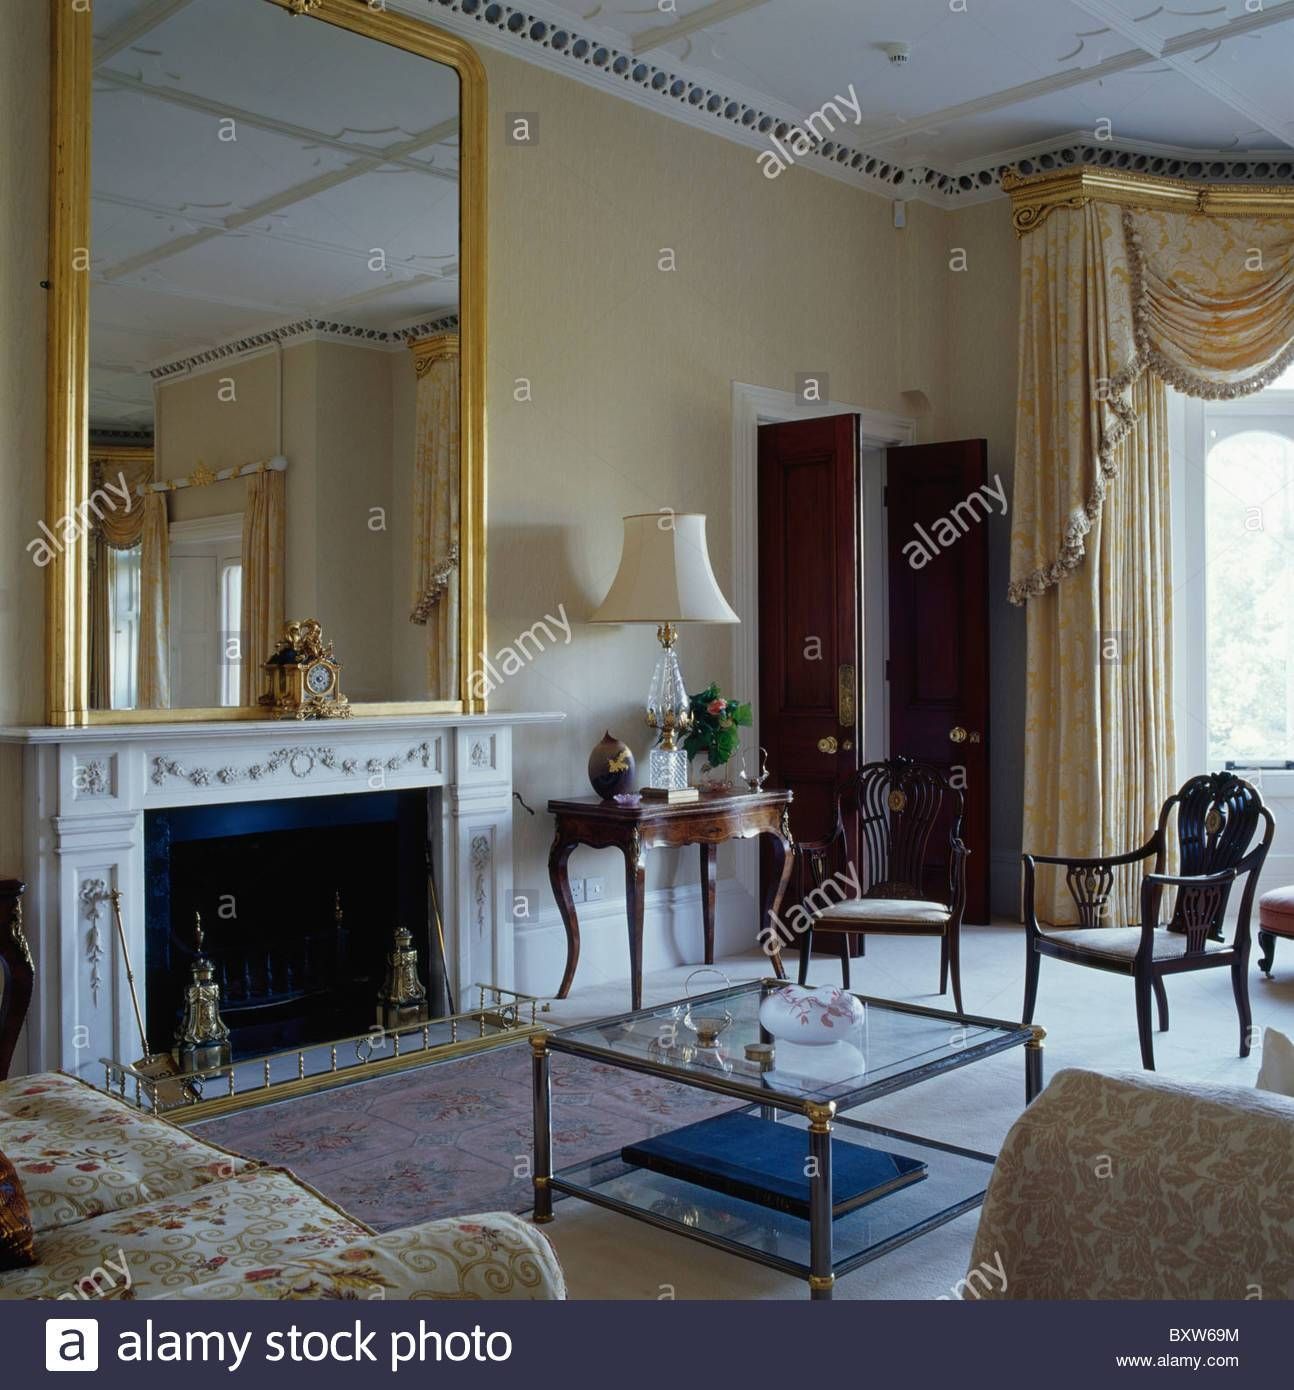 Large Antique Gilt Mirror Above Ornate Fireplace In Living Room With Regard To Large Gilt Mirrors (View 22 of 25)